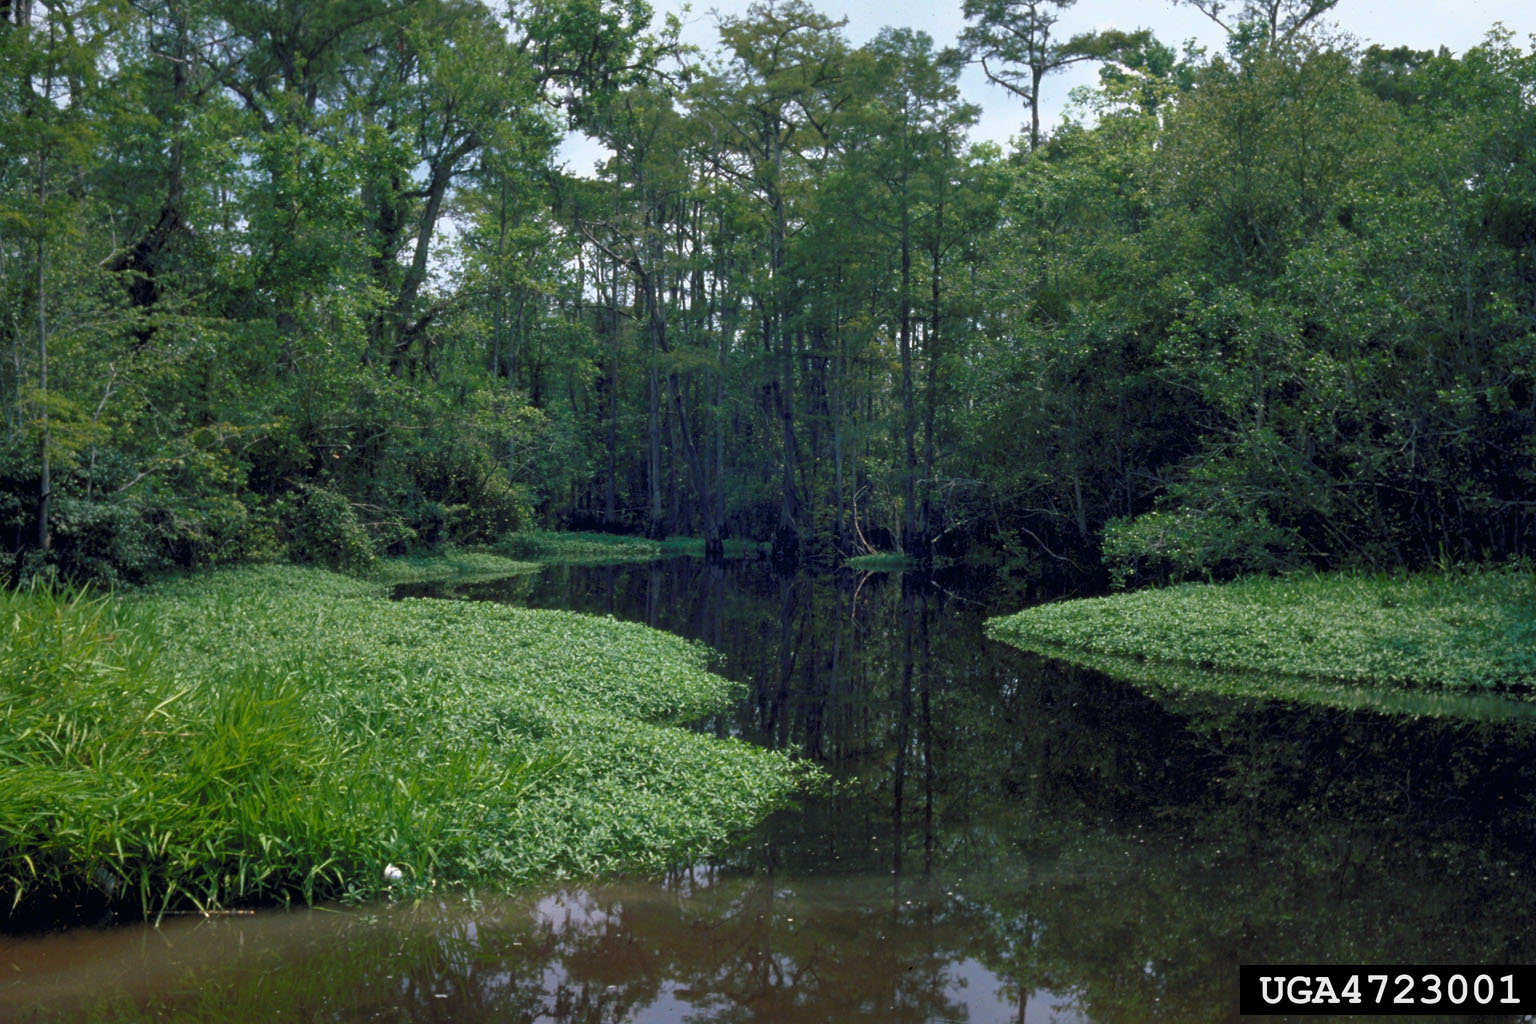 A monoculture of alligatorweed growing from the shore into the shallow water.